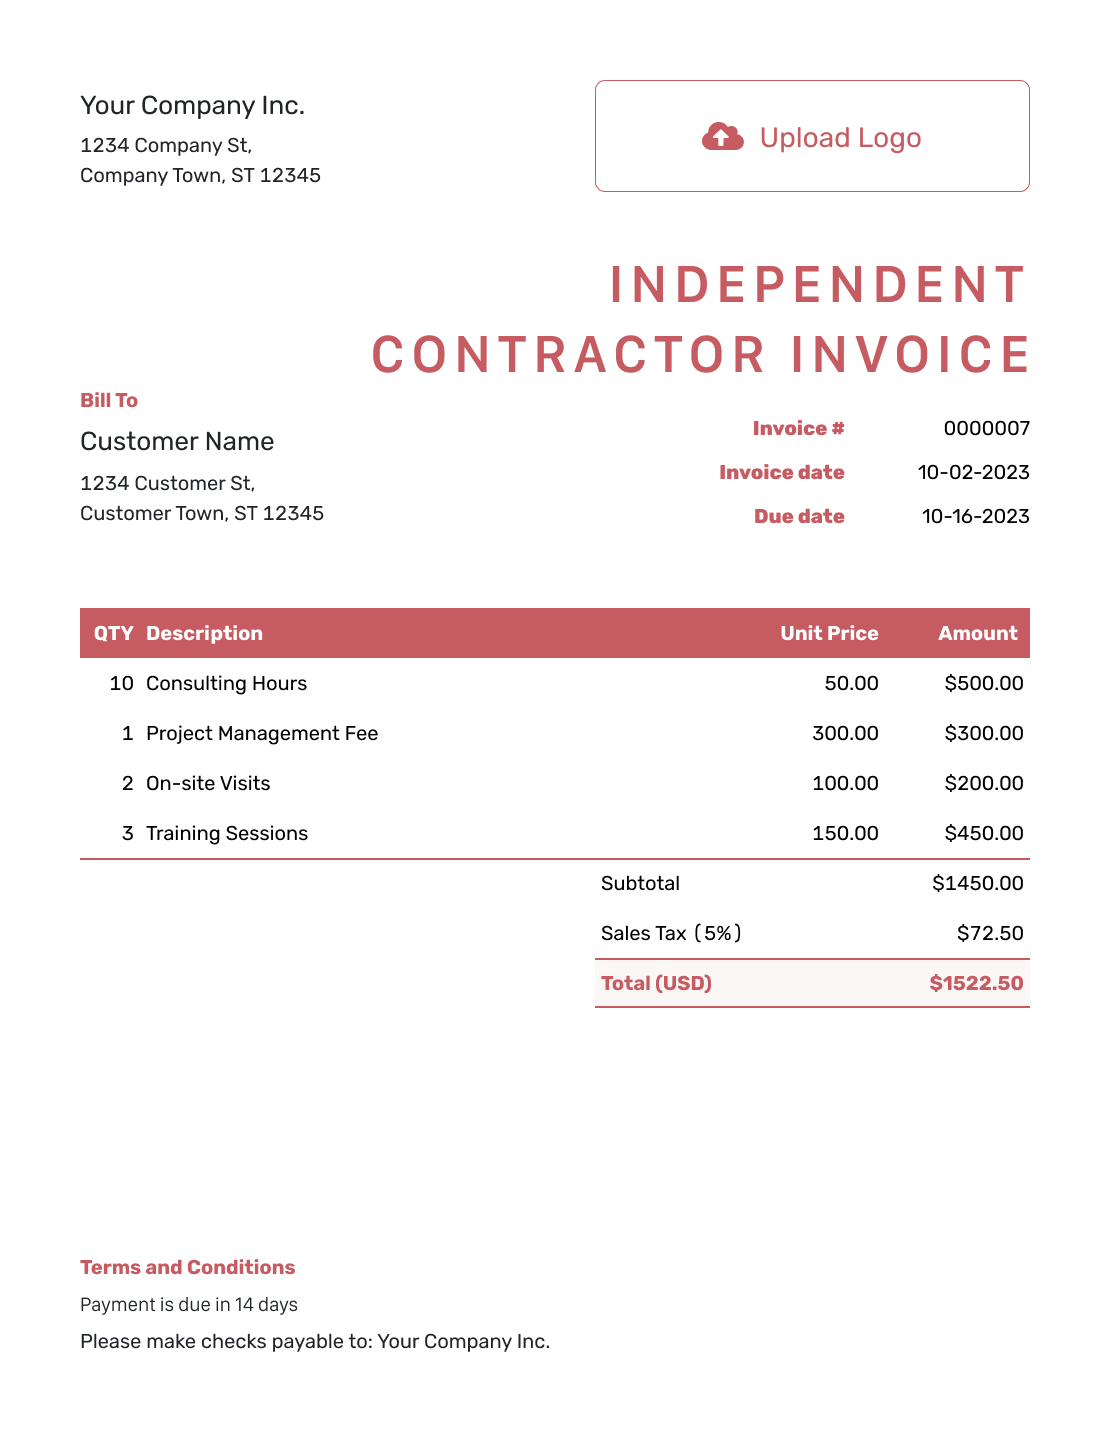 Itemized Independent Contractor Invoice Template